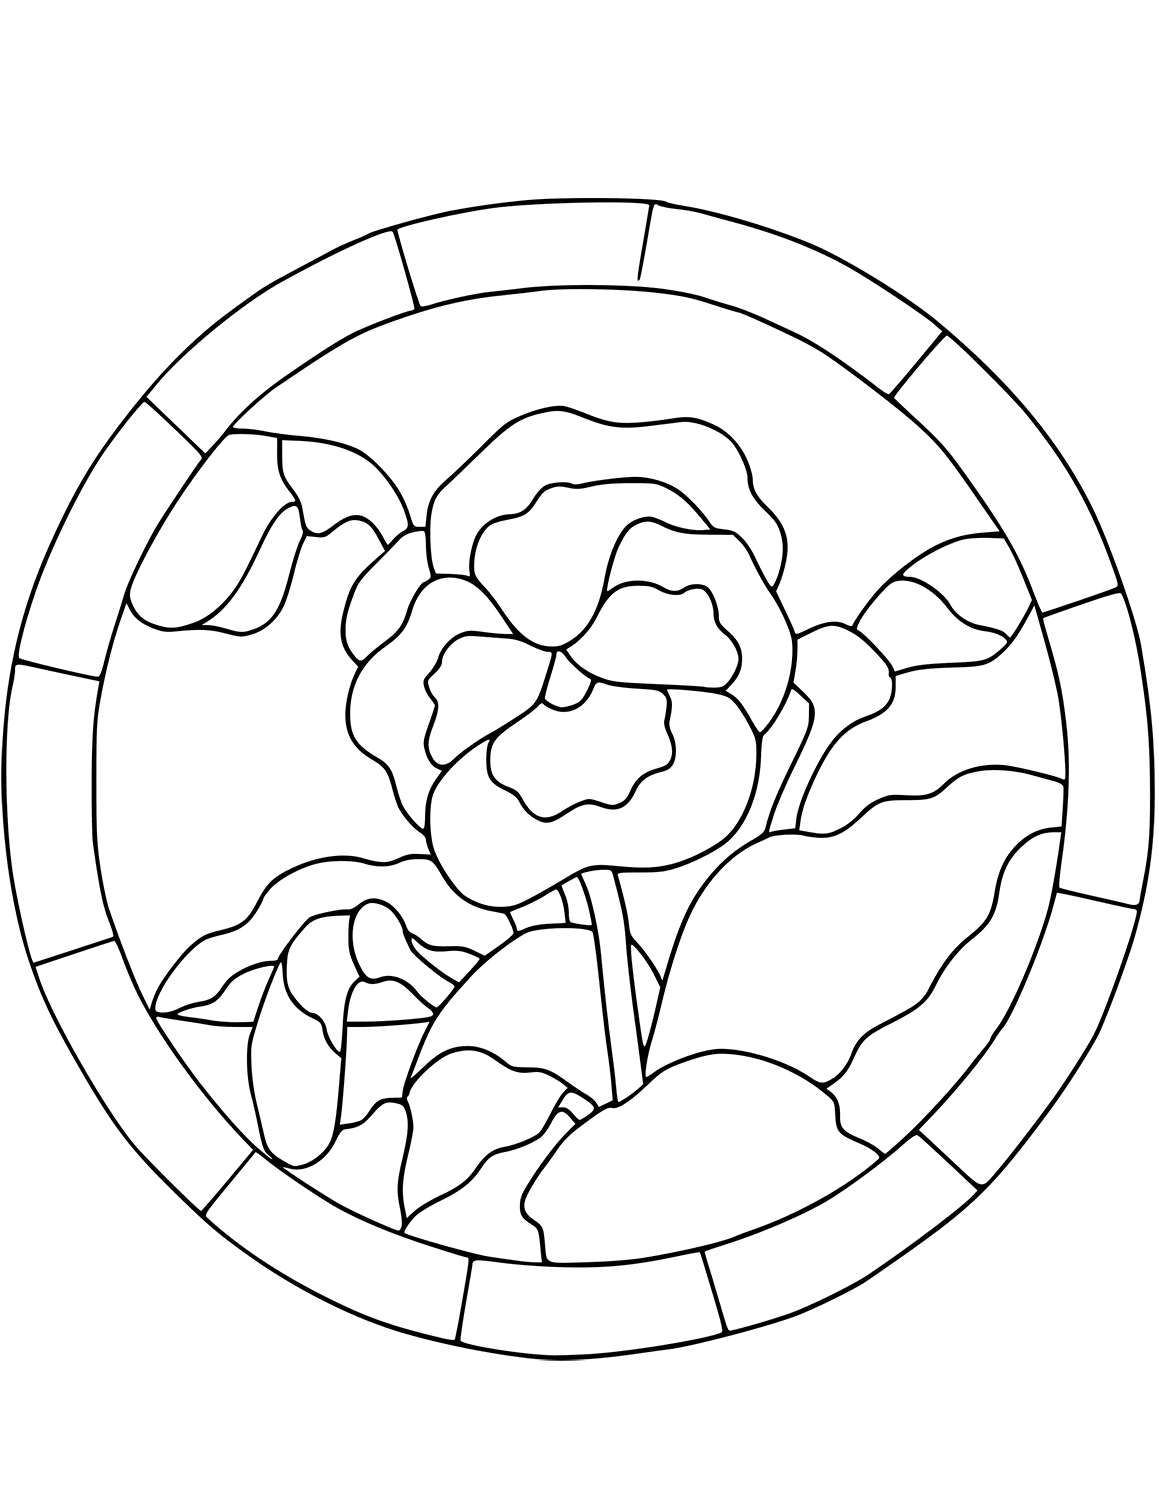 Pansy coloring pages